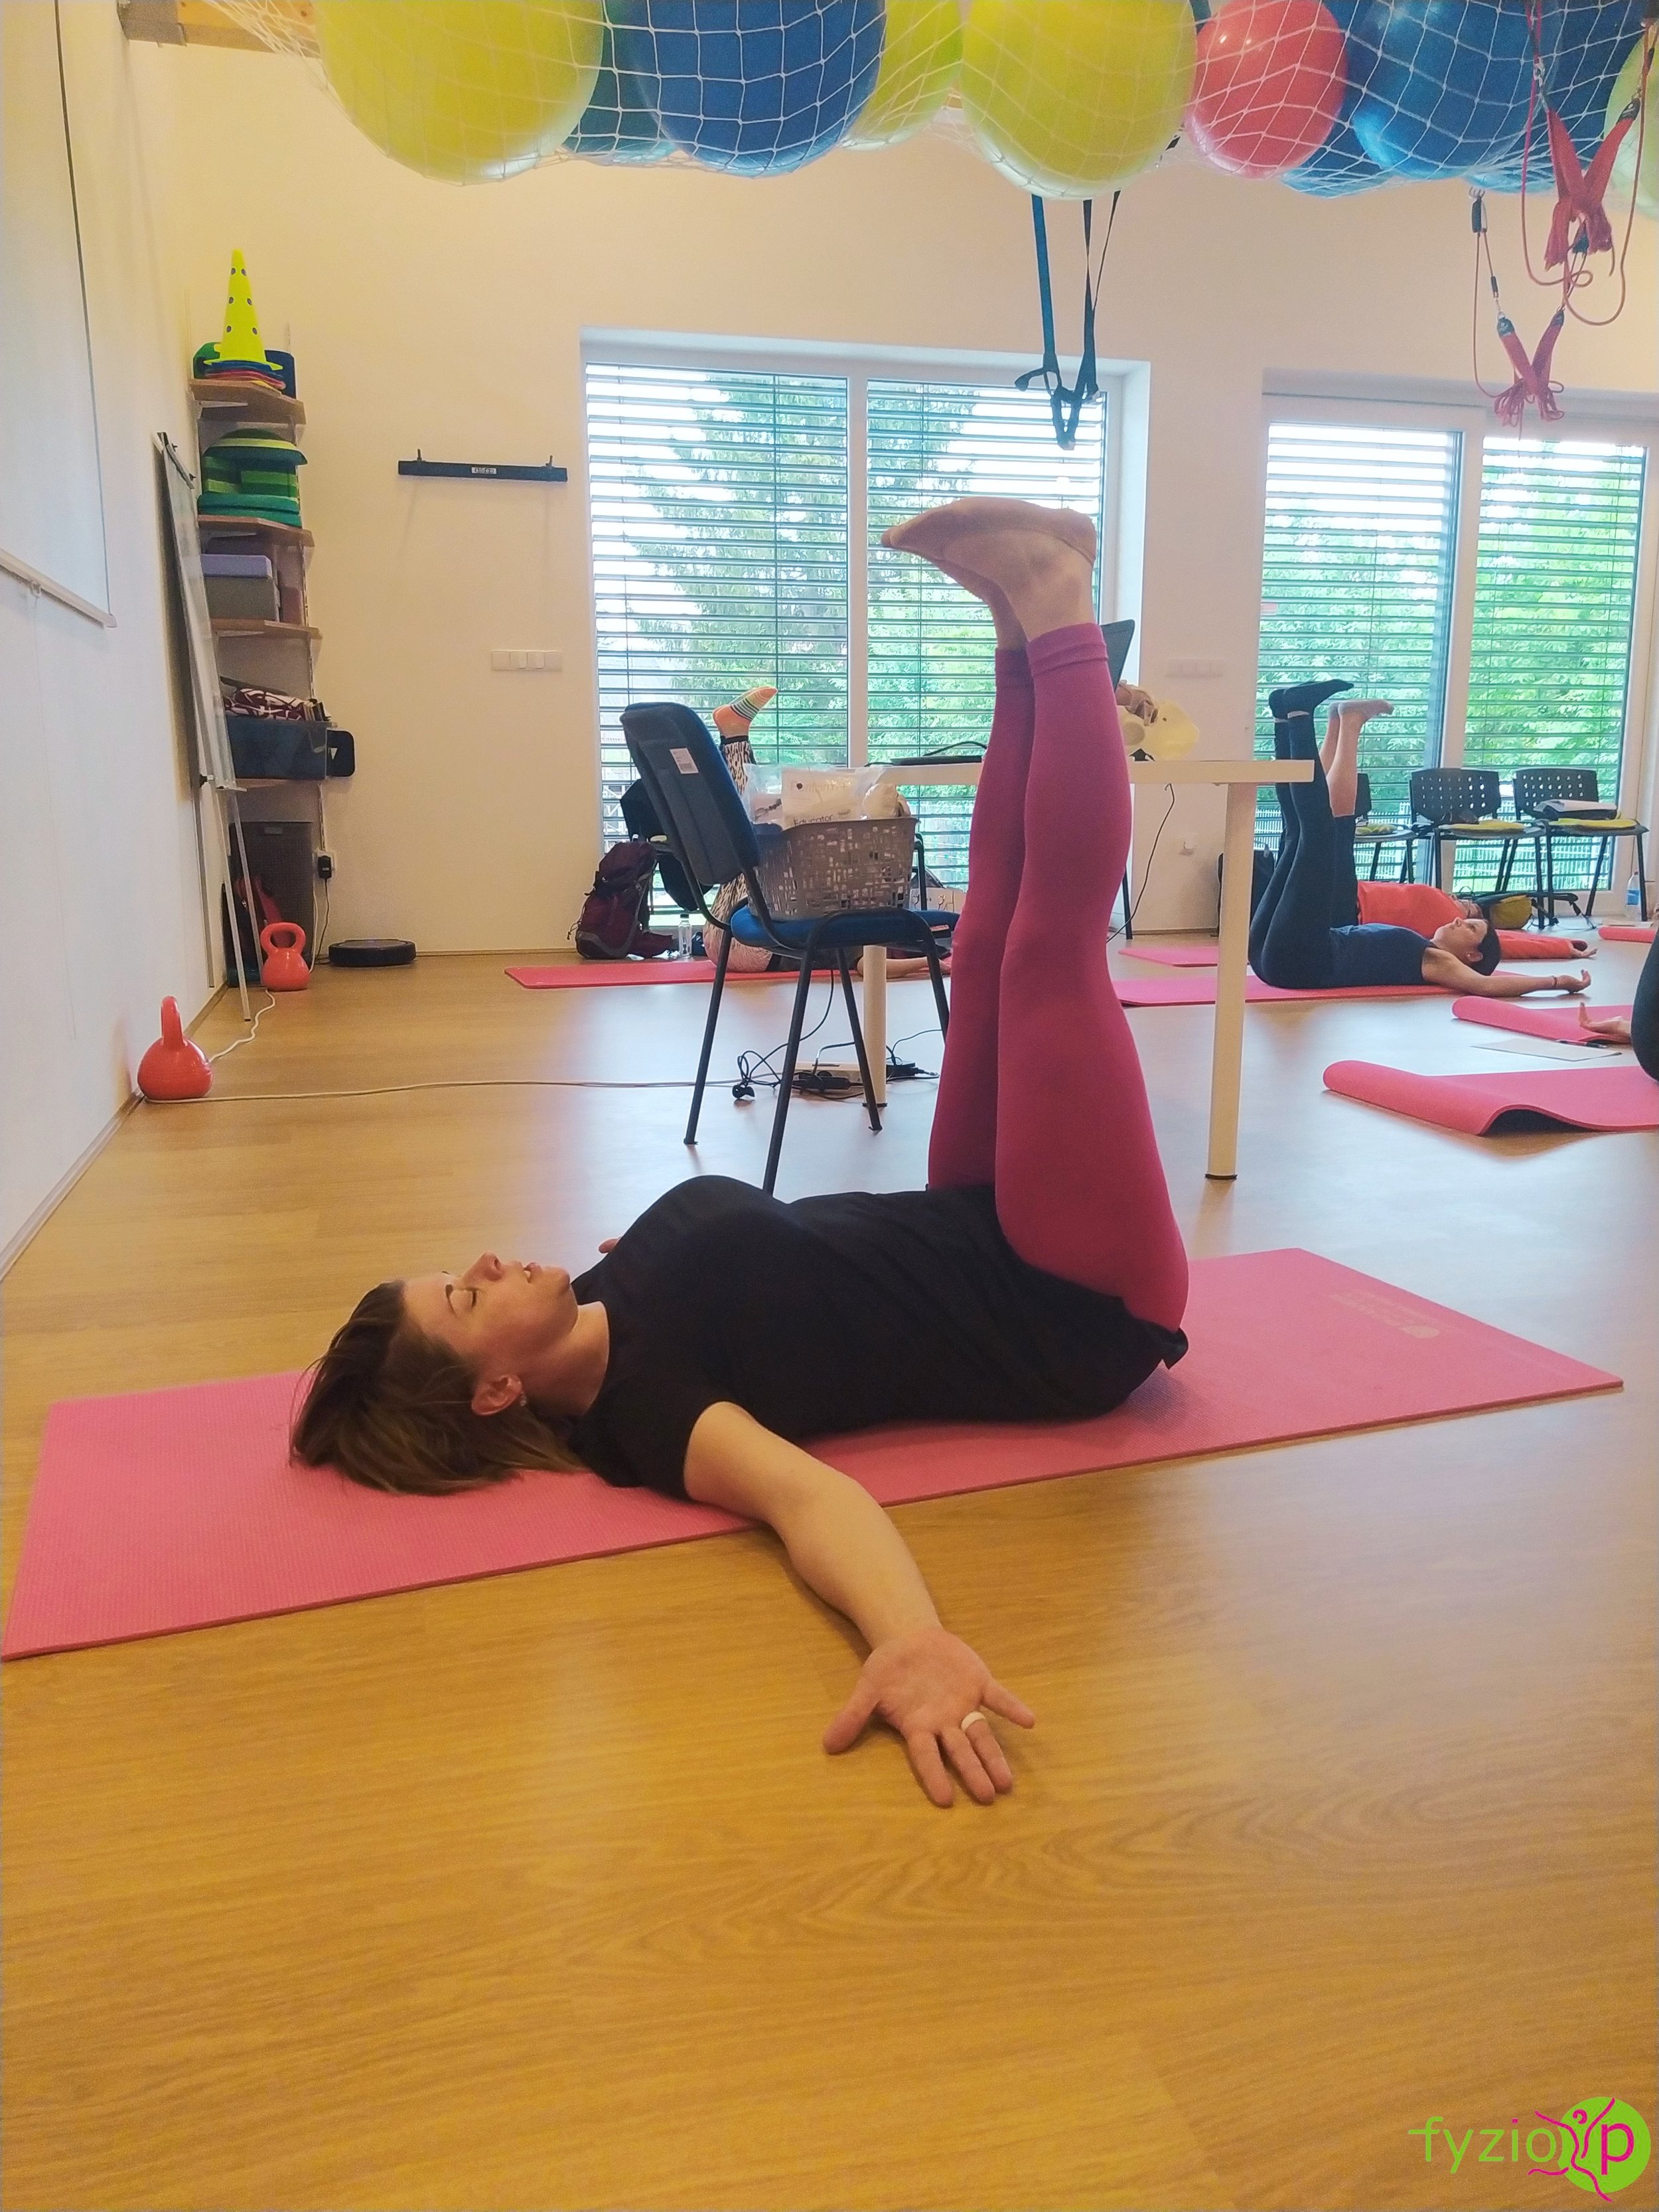 2019 - demonstration of suitable exercises to strengthen the pelvic floor